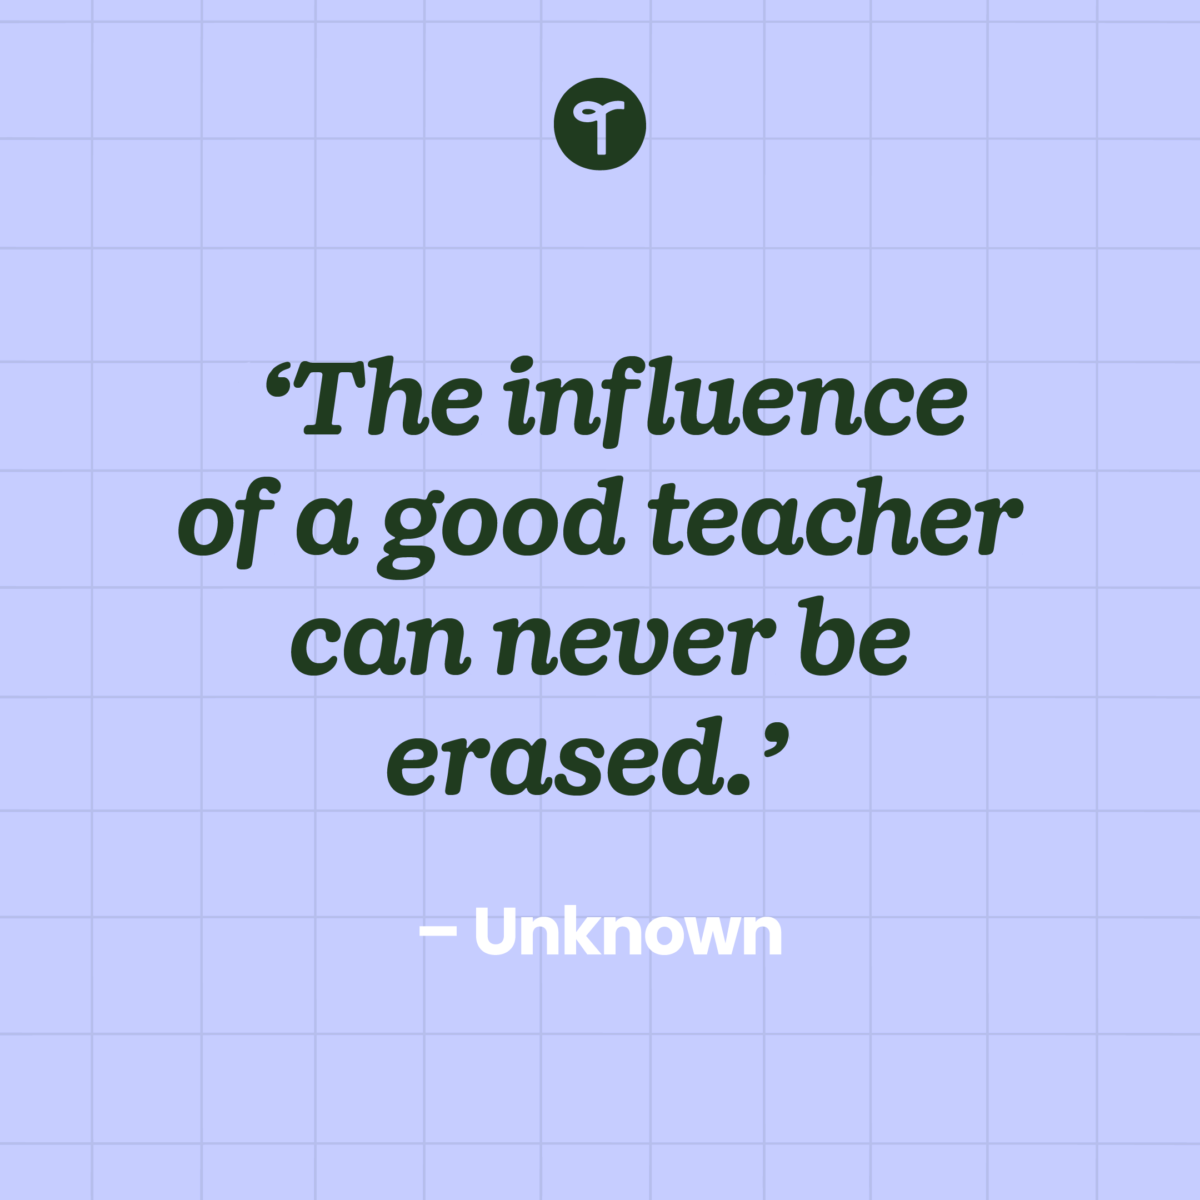 'The influence of a good teacher can never be erased.' — Unknown written on a purple checked background